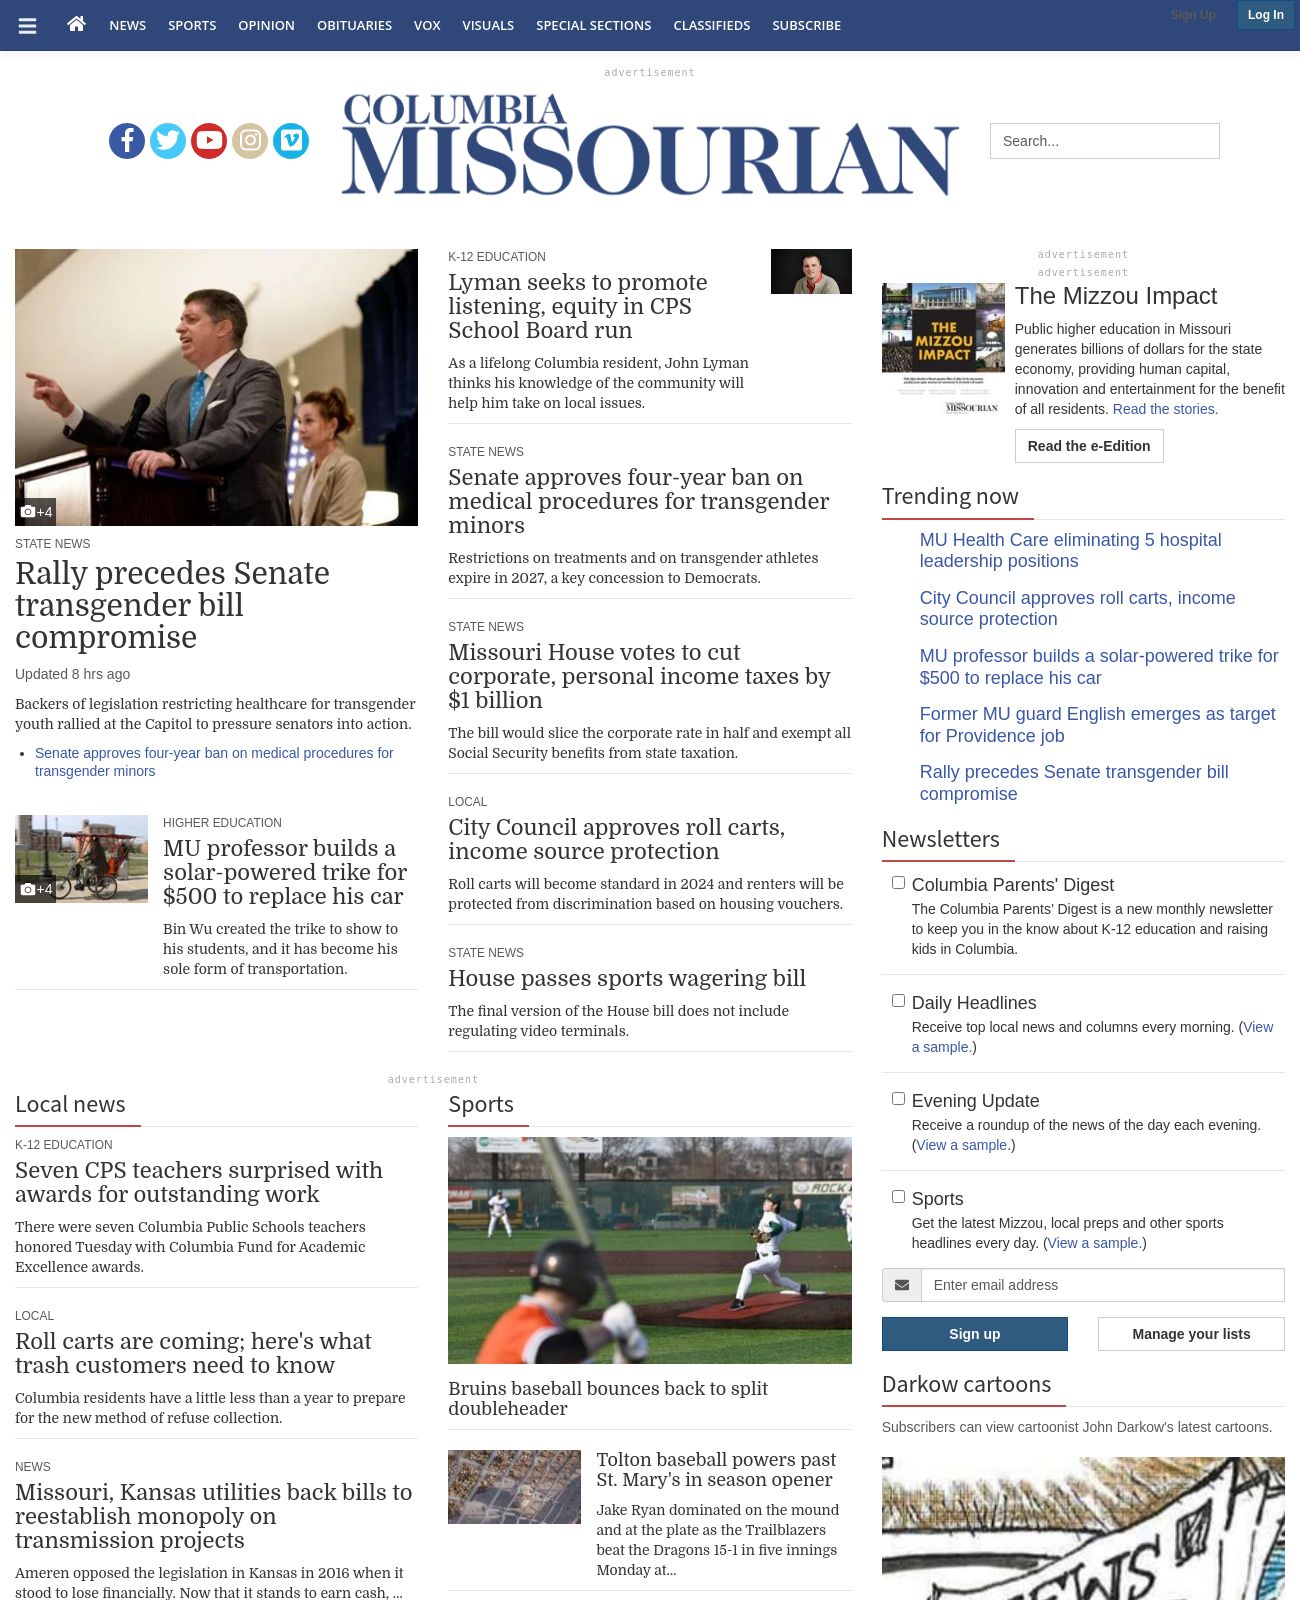 Columbia Missourian at 2023-03-21 17:38:17-05:00 local time